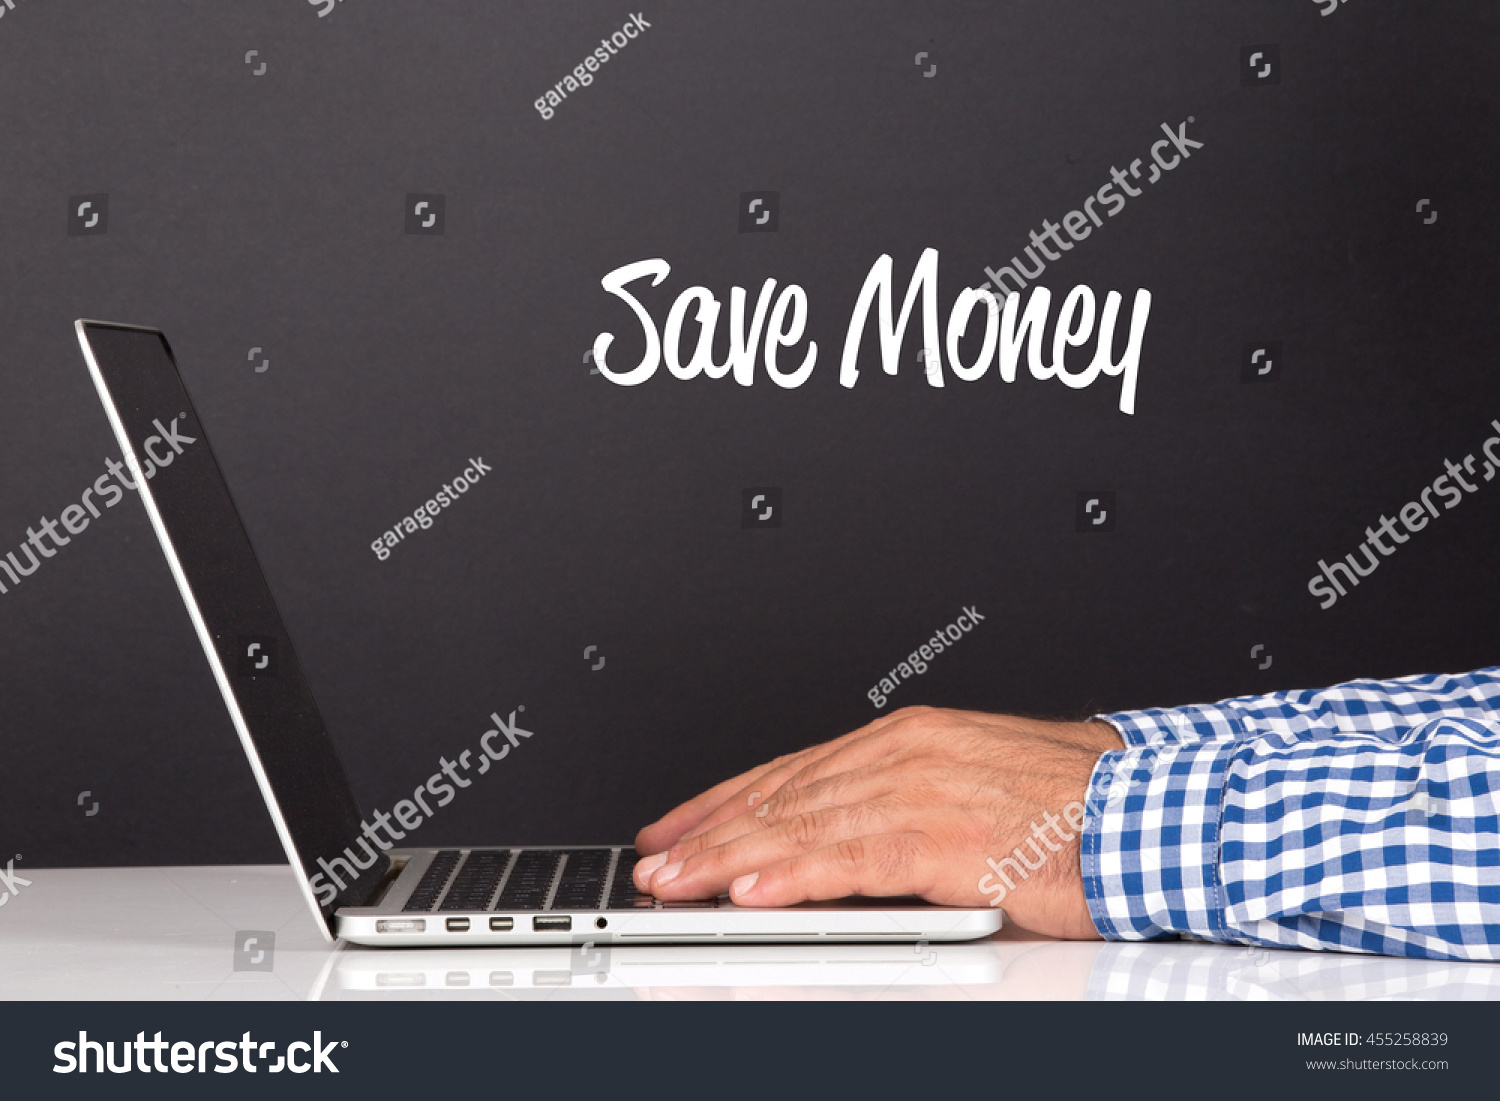 WORKING OFFICE COMMUNICATION PEOPLE USING COMPUTER SAVE MONEY CONCEPT #455258839